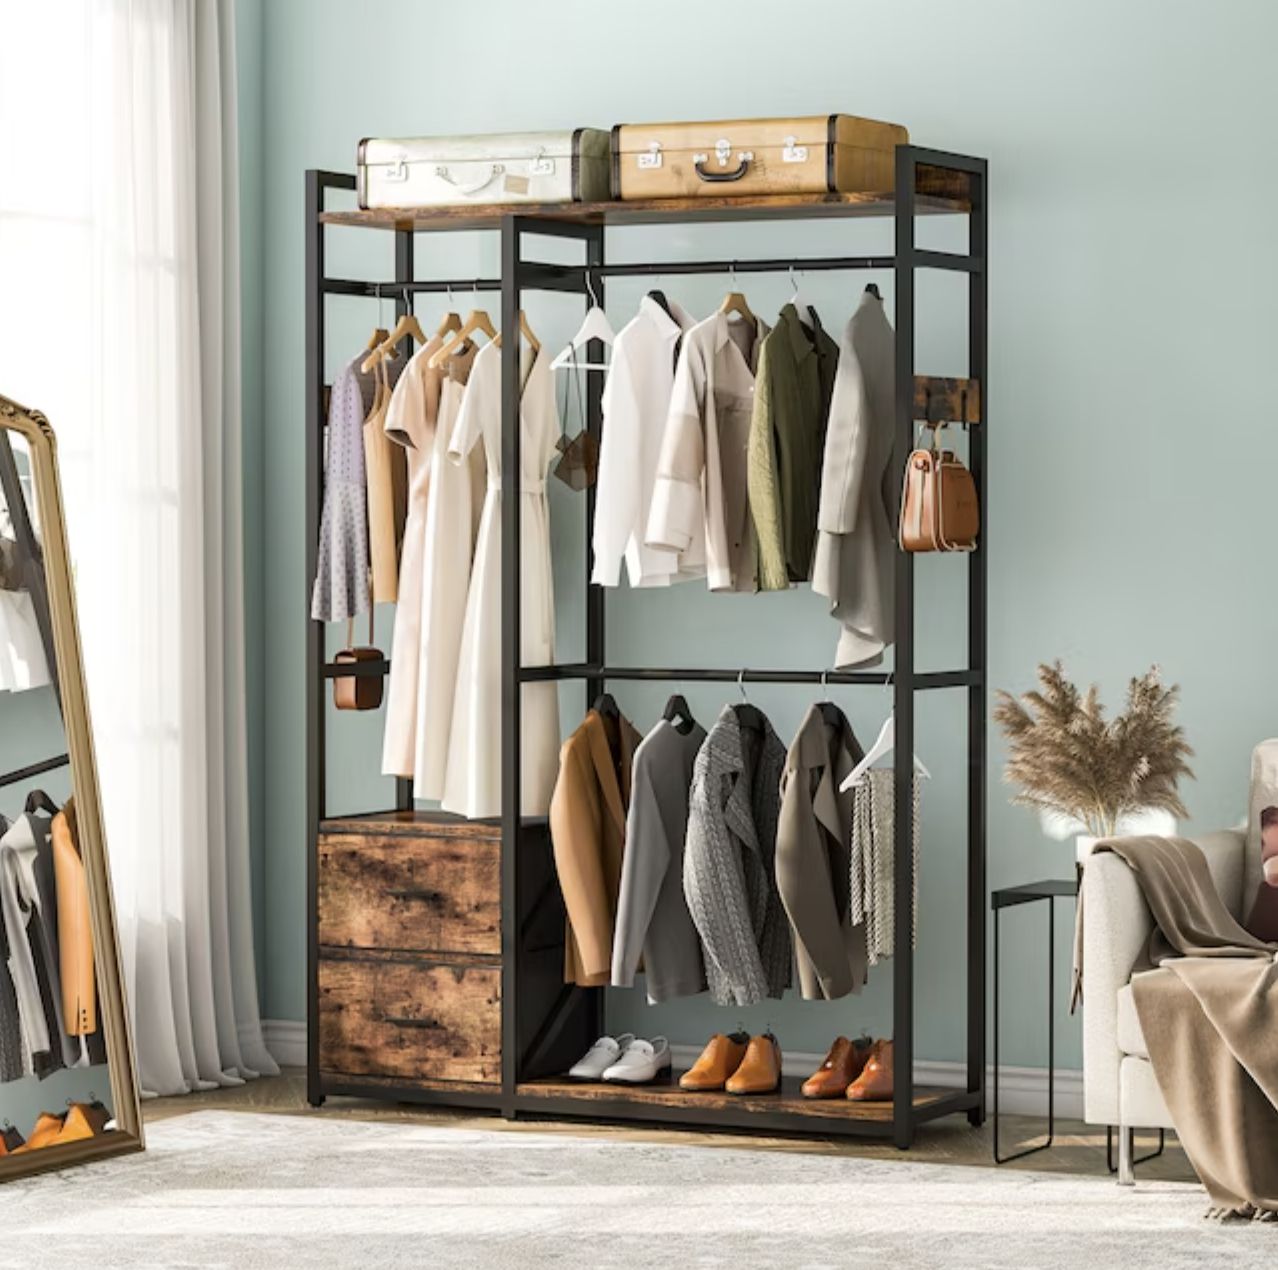 freestanding closet with dresses and jackets hung and shoes and suitcases resting on shelves